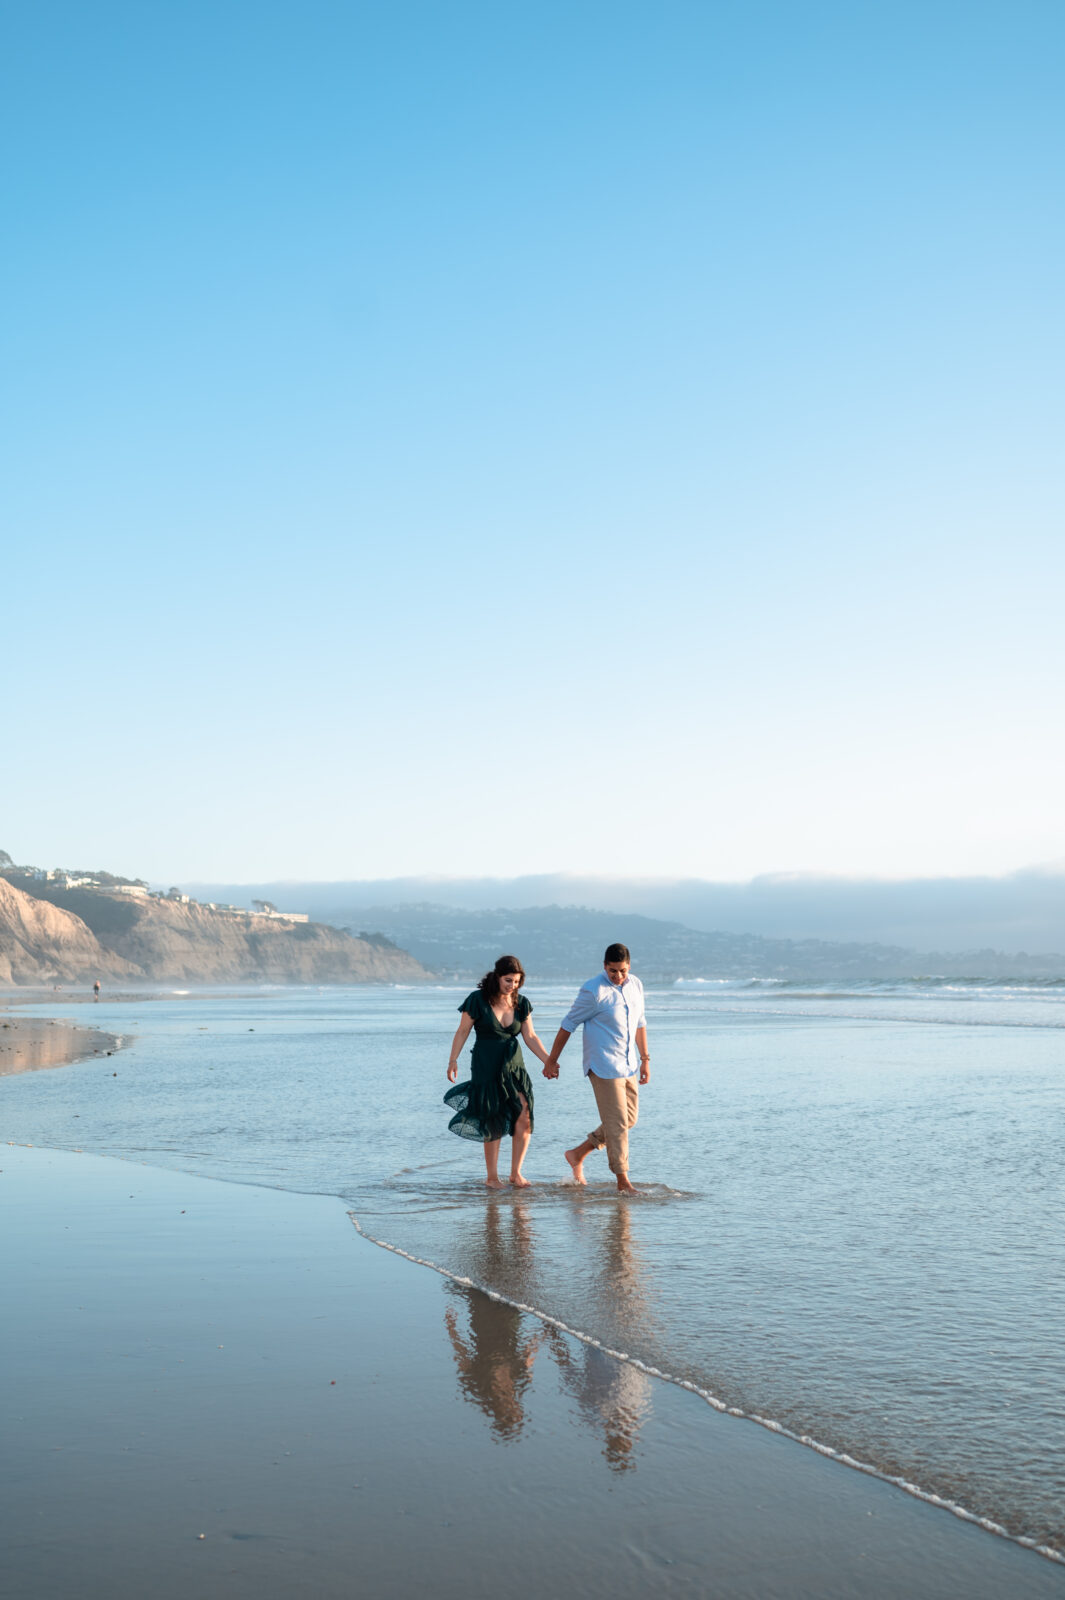 Couple walking arm-in-arm in a picturesque beach in one of our popular engagement photoshoot poses